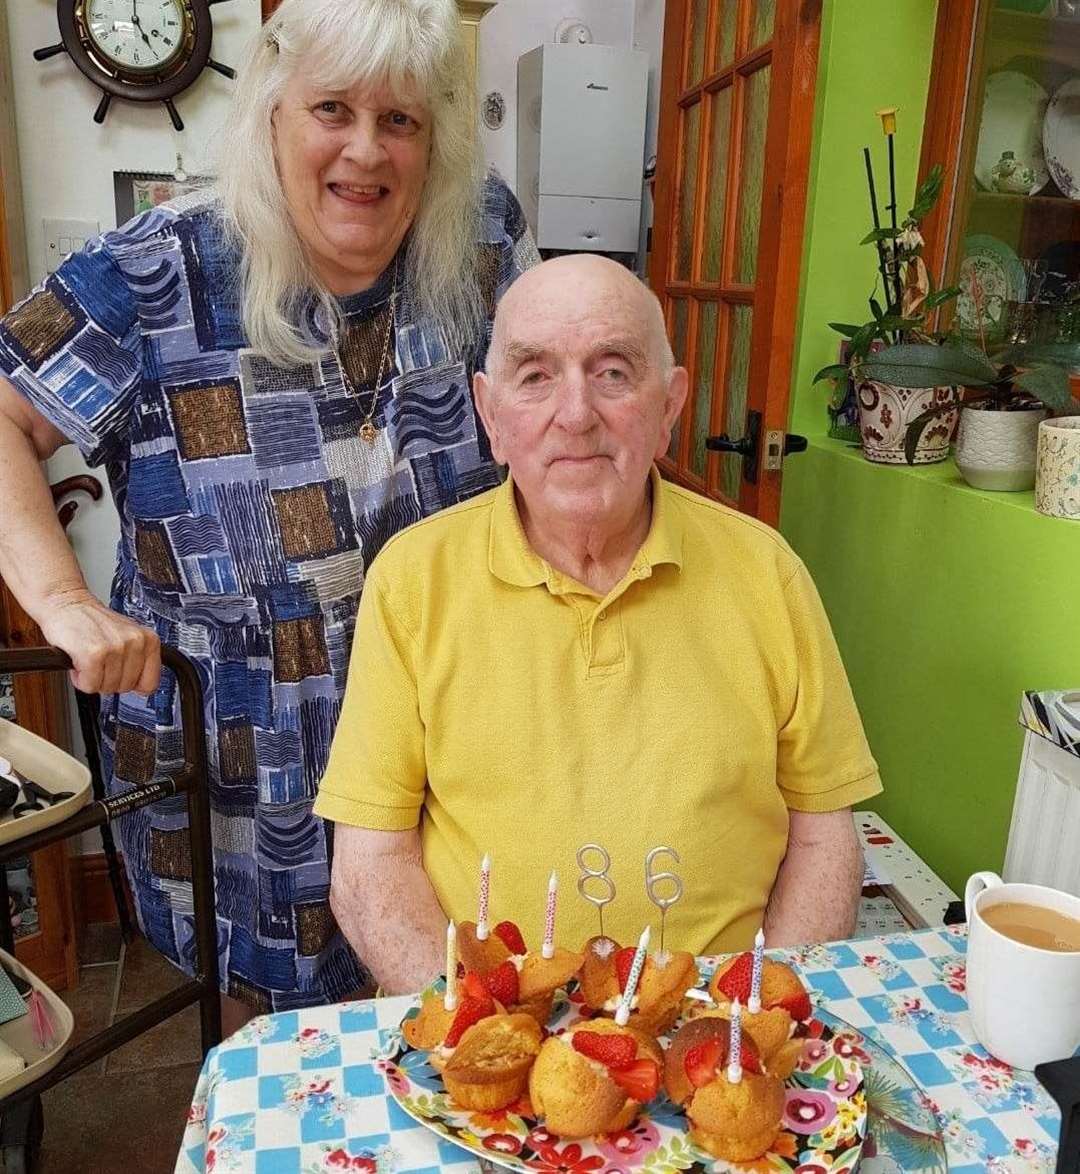 Patrick and wife Susan on his 86th birthday